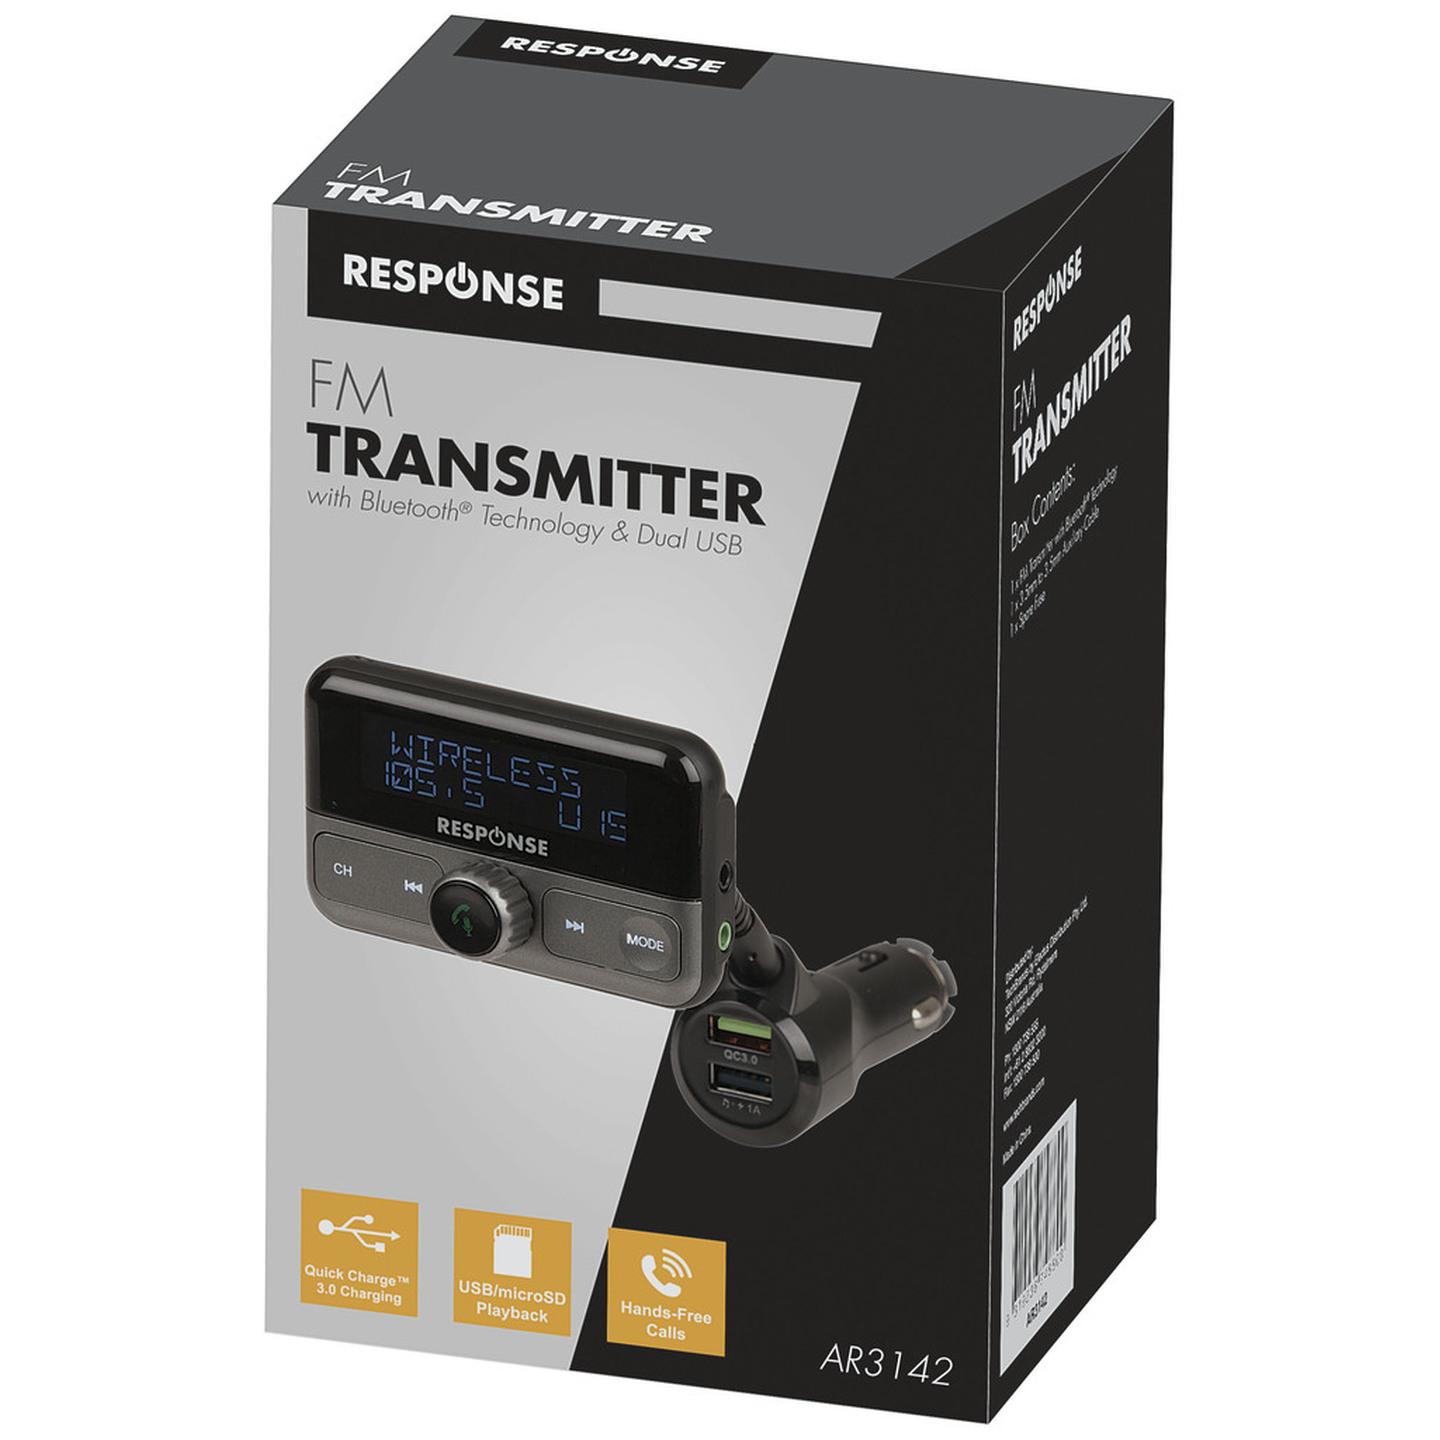 FM Transmitter with Bluetooth Technology and Qualcomm Quick Charge 3.0 USB